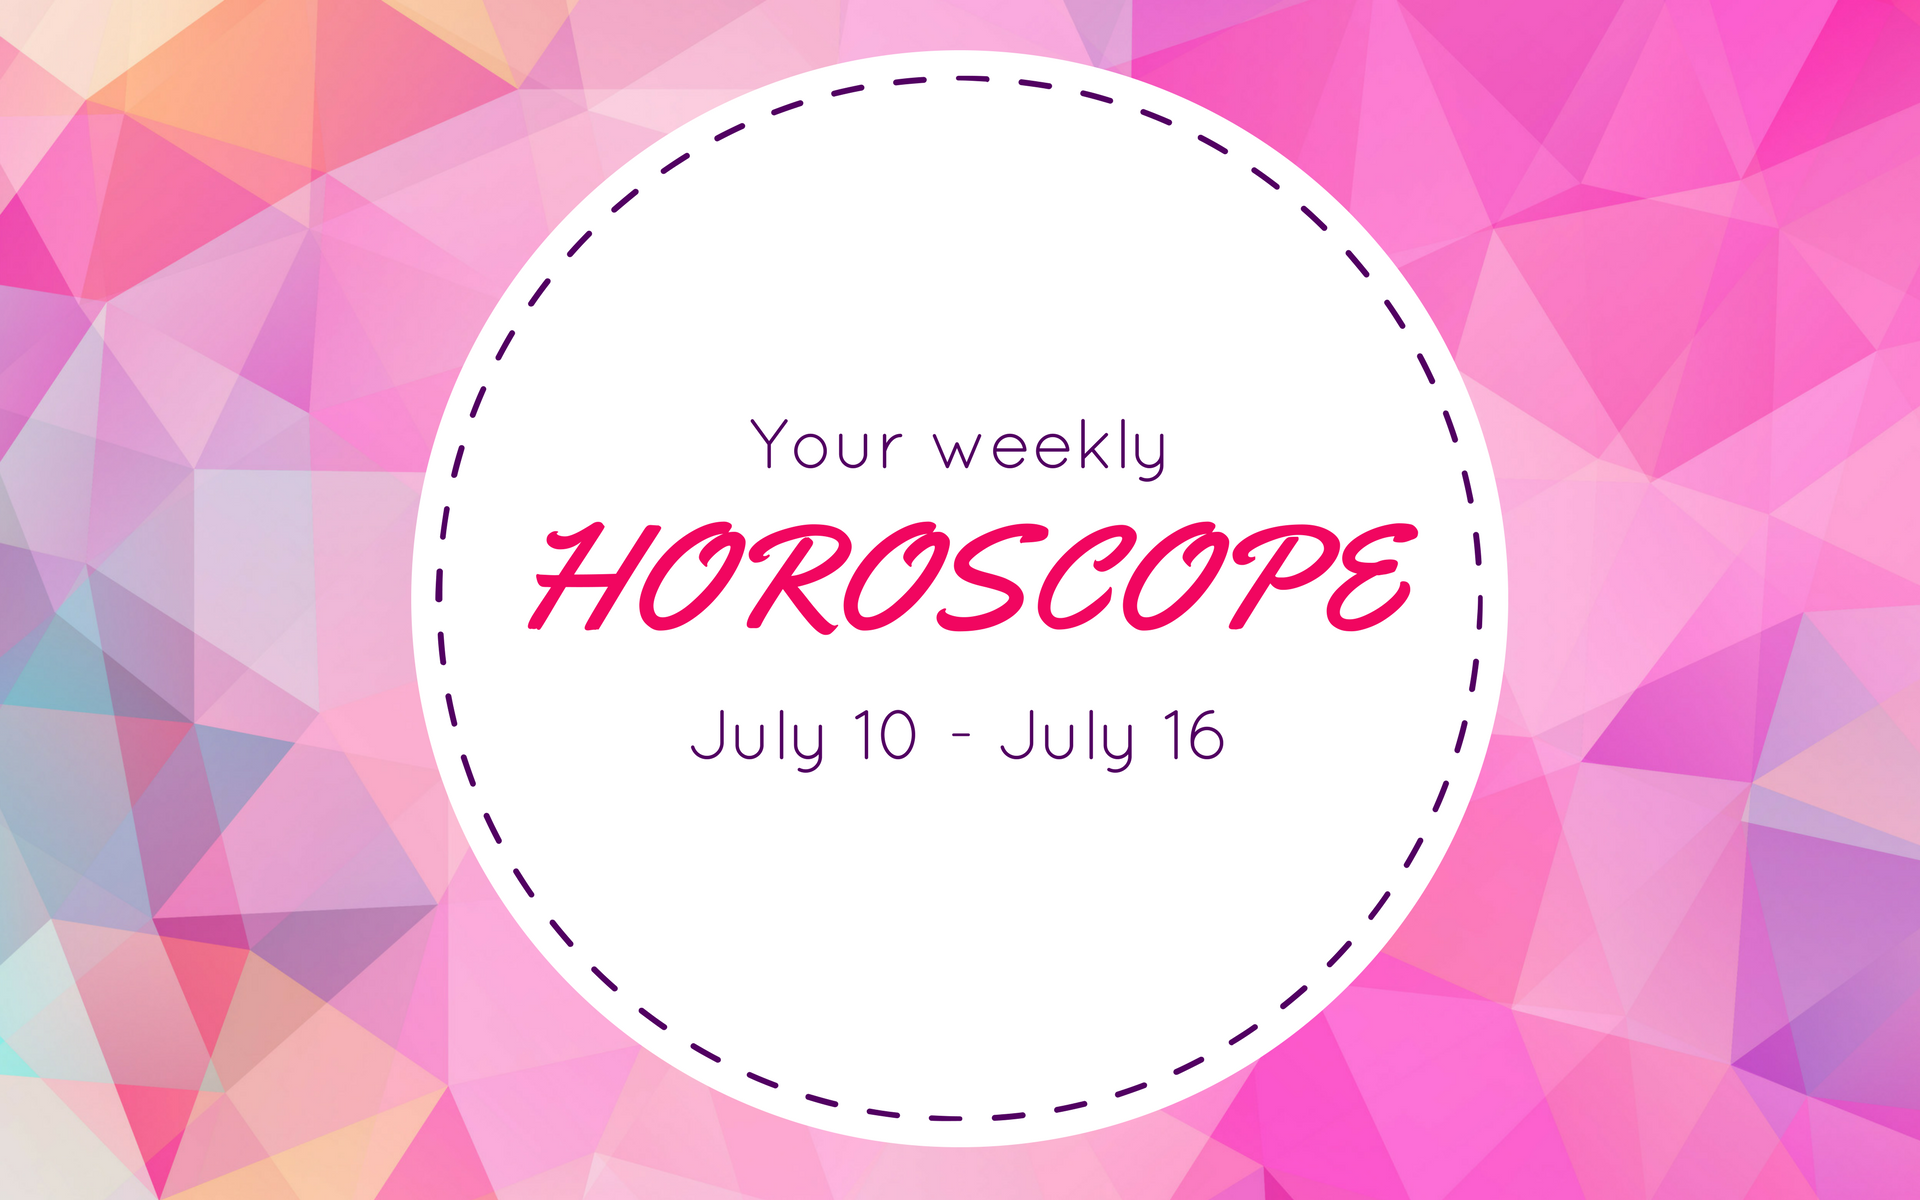 Your Weekly Horoscope: July 10 - July 16